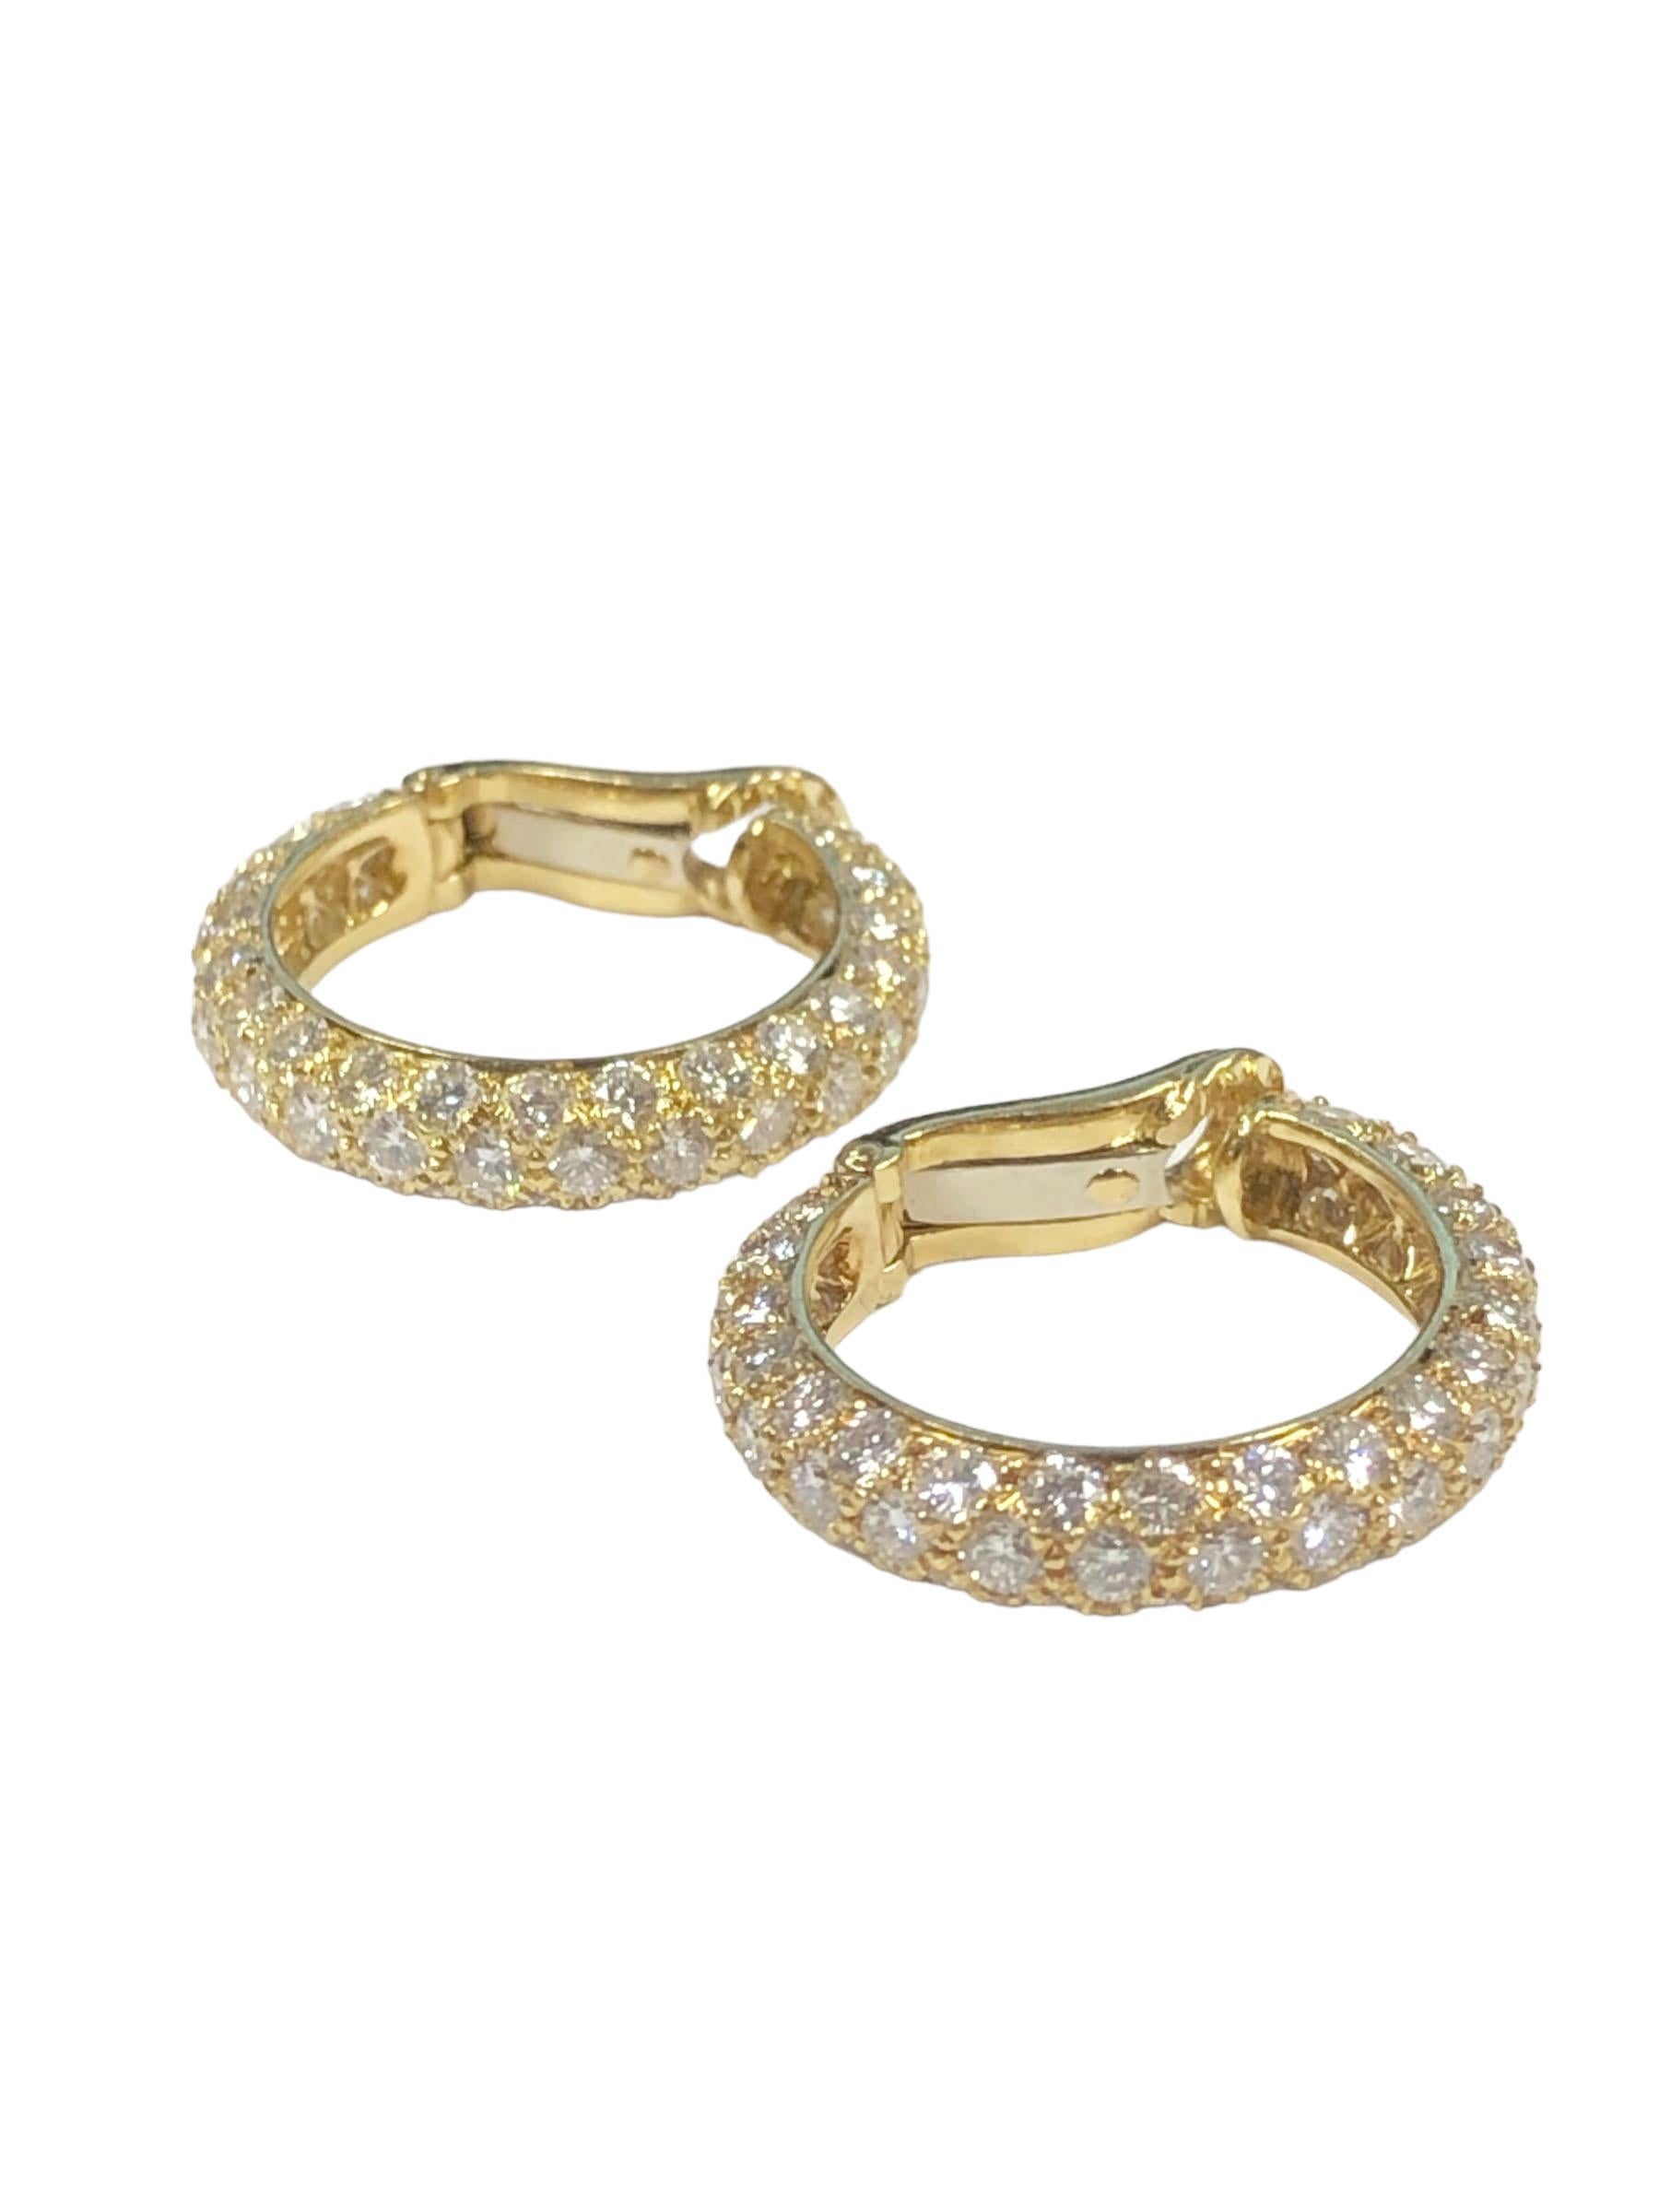 Circa 2010 Tiffany & Company Hoop Earrings, measuring 3/4 inch in diameter, 5/8 inch in length and 1/8 inch wide. Set with 110 Round Brilliant cut Diamonds totaling 3 Carats and being G in Color and VS in Clarity. Having Clip Backs to which a post